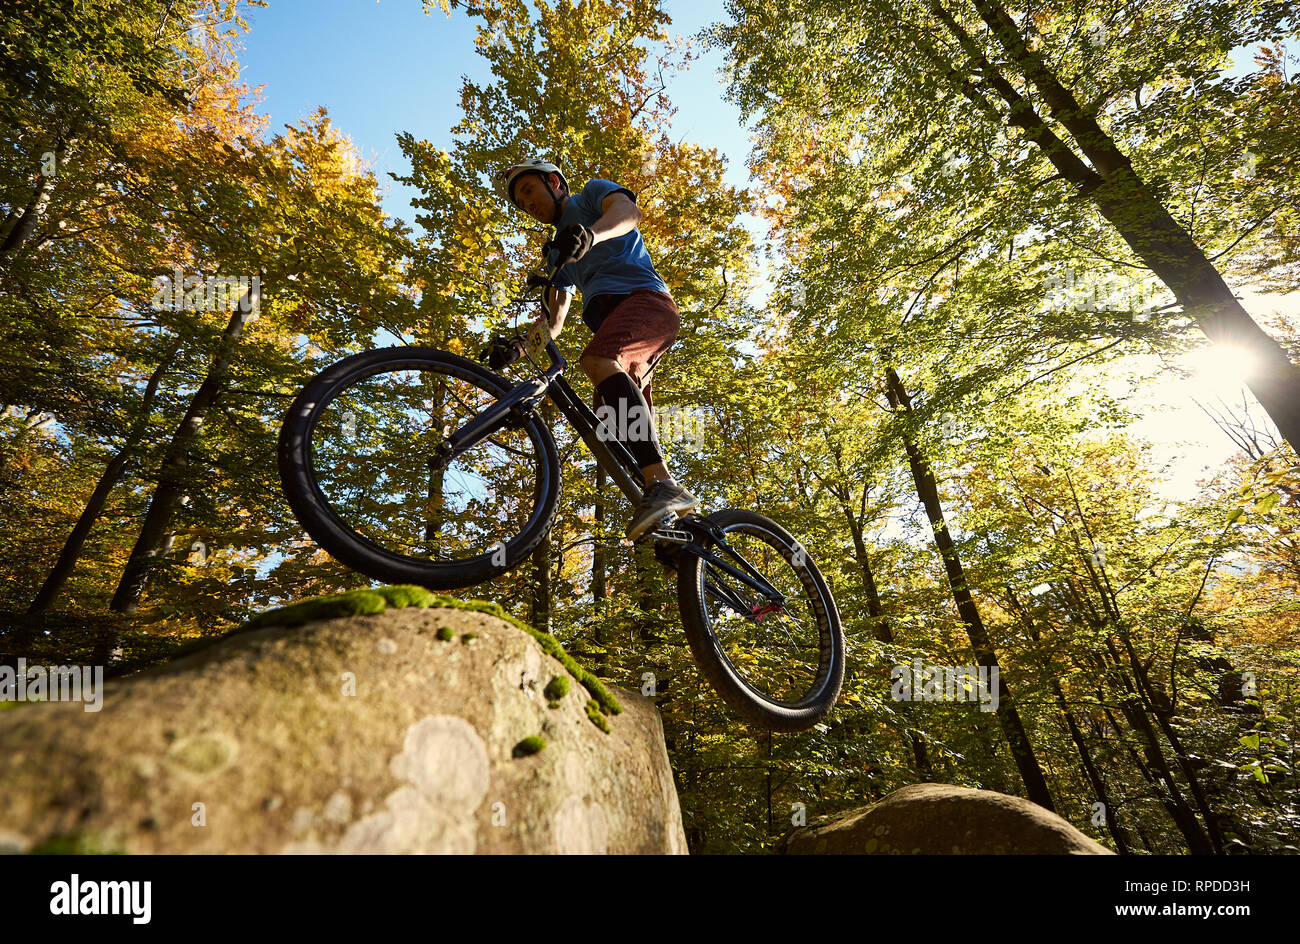 Professional cyclist jumping on trial bicycle on big boulder. Low angle view of male rider making acrobatic trick in the forest on summer sunny day. Concept of extreme sport active lifestyle Stock Photo